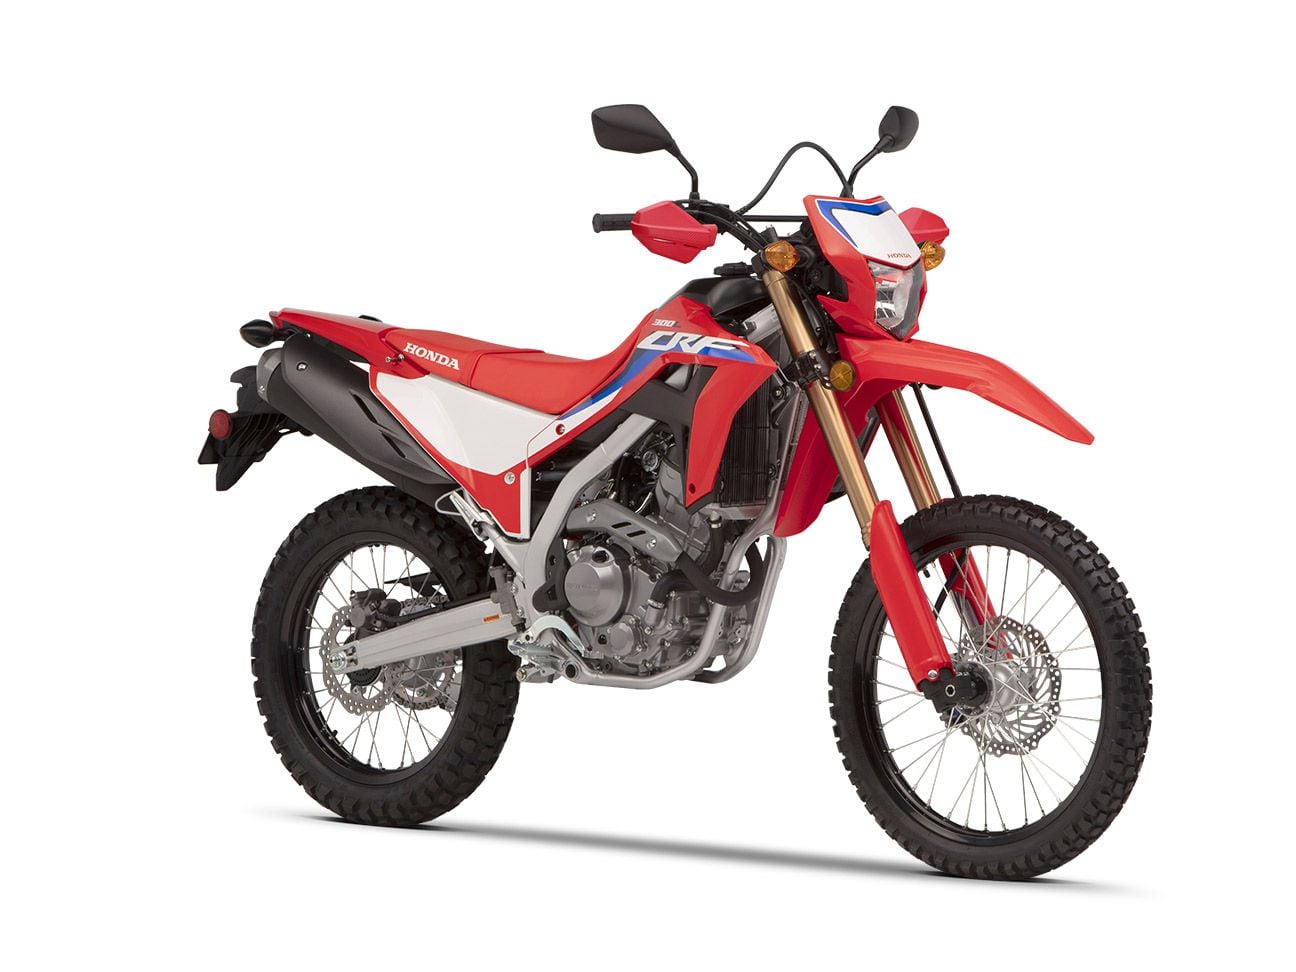 Big Red styled the CRF300L to look similar to models in its CRF Performance line such as the CRF450X.